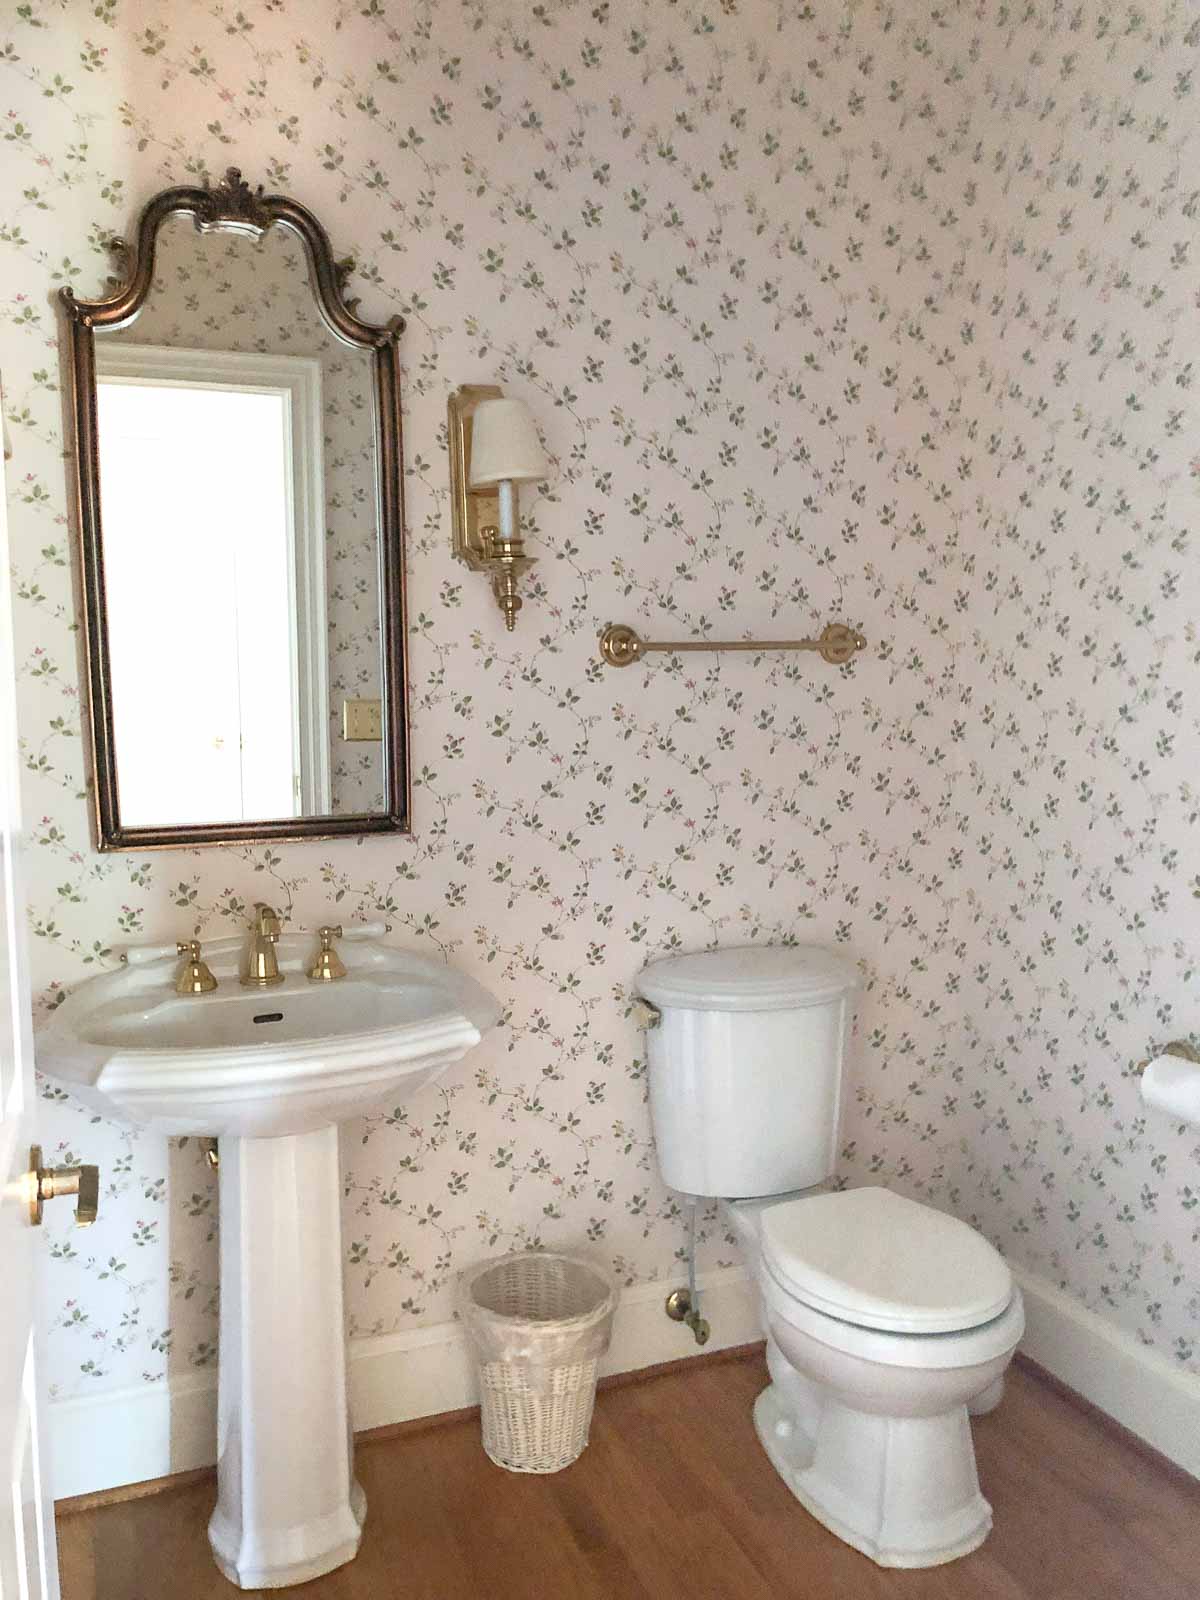 Our hall bathroom before remodeling - pedestal sink, arched mirror, and dated floral wallpaper